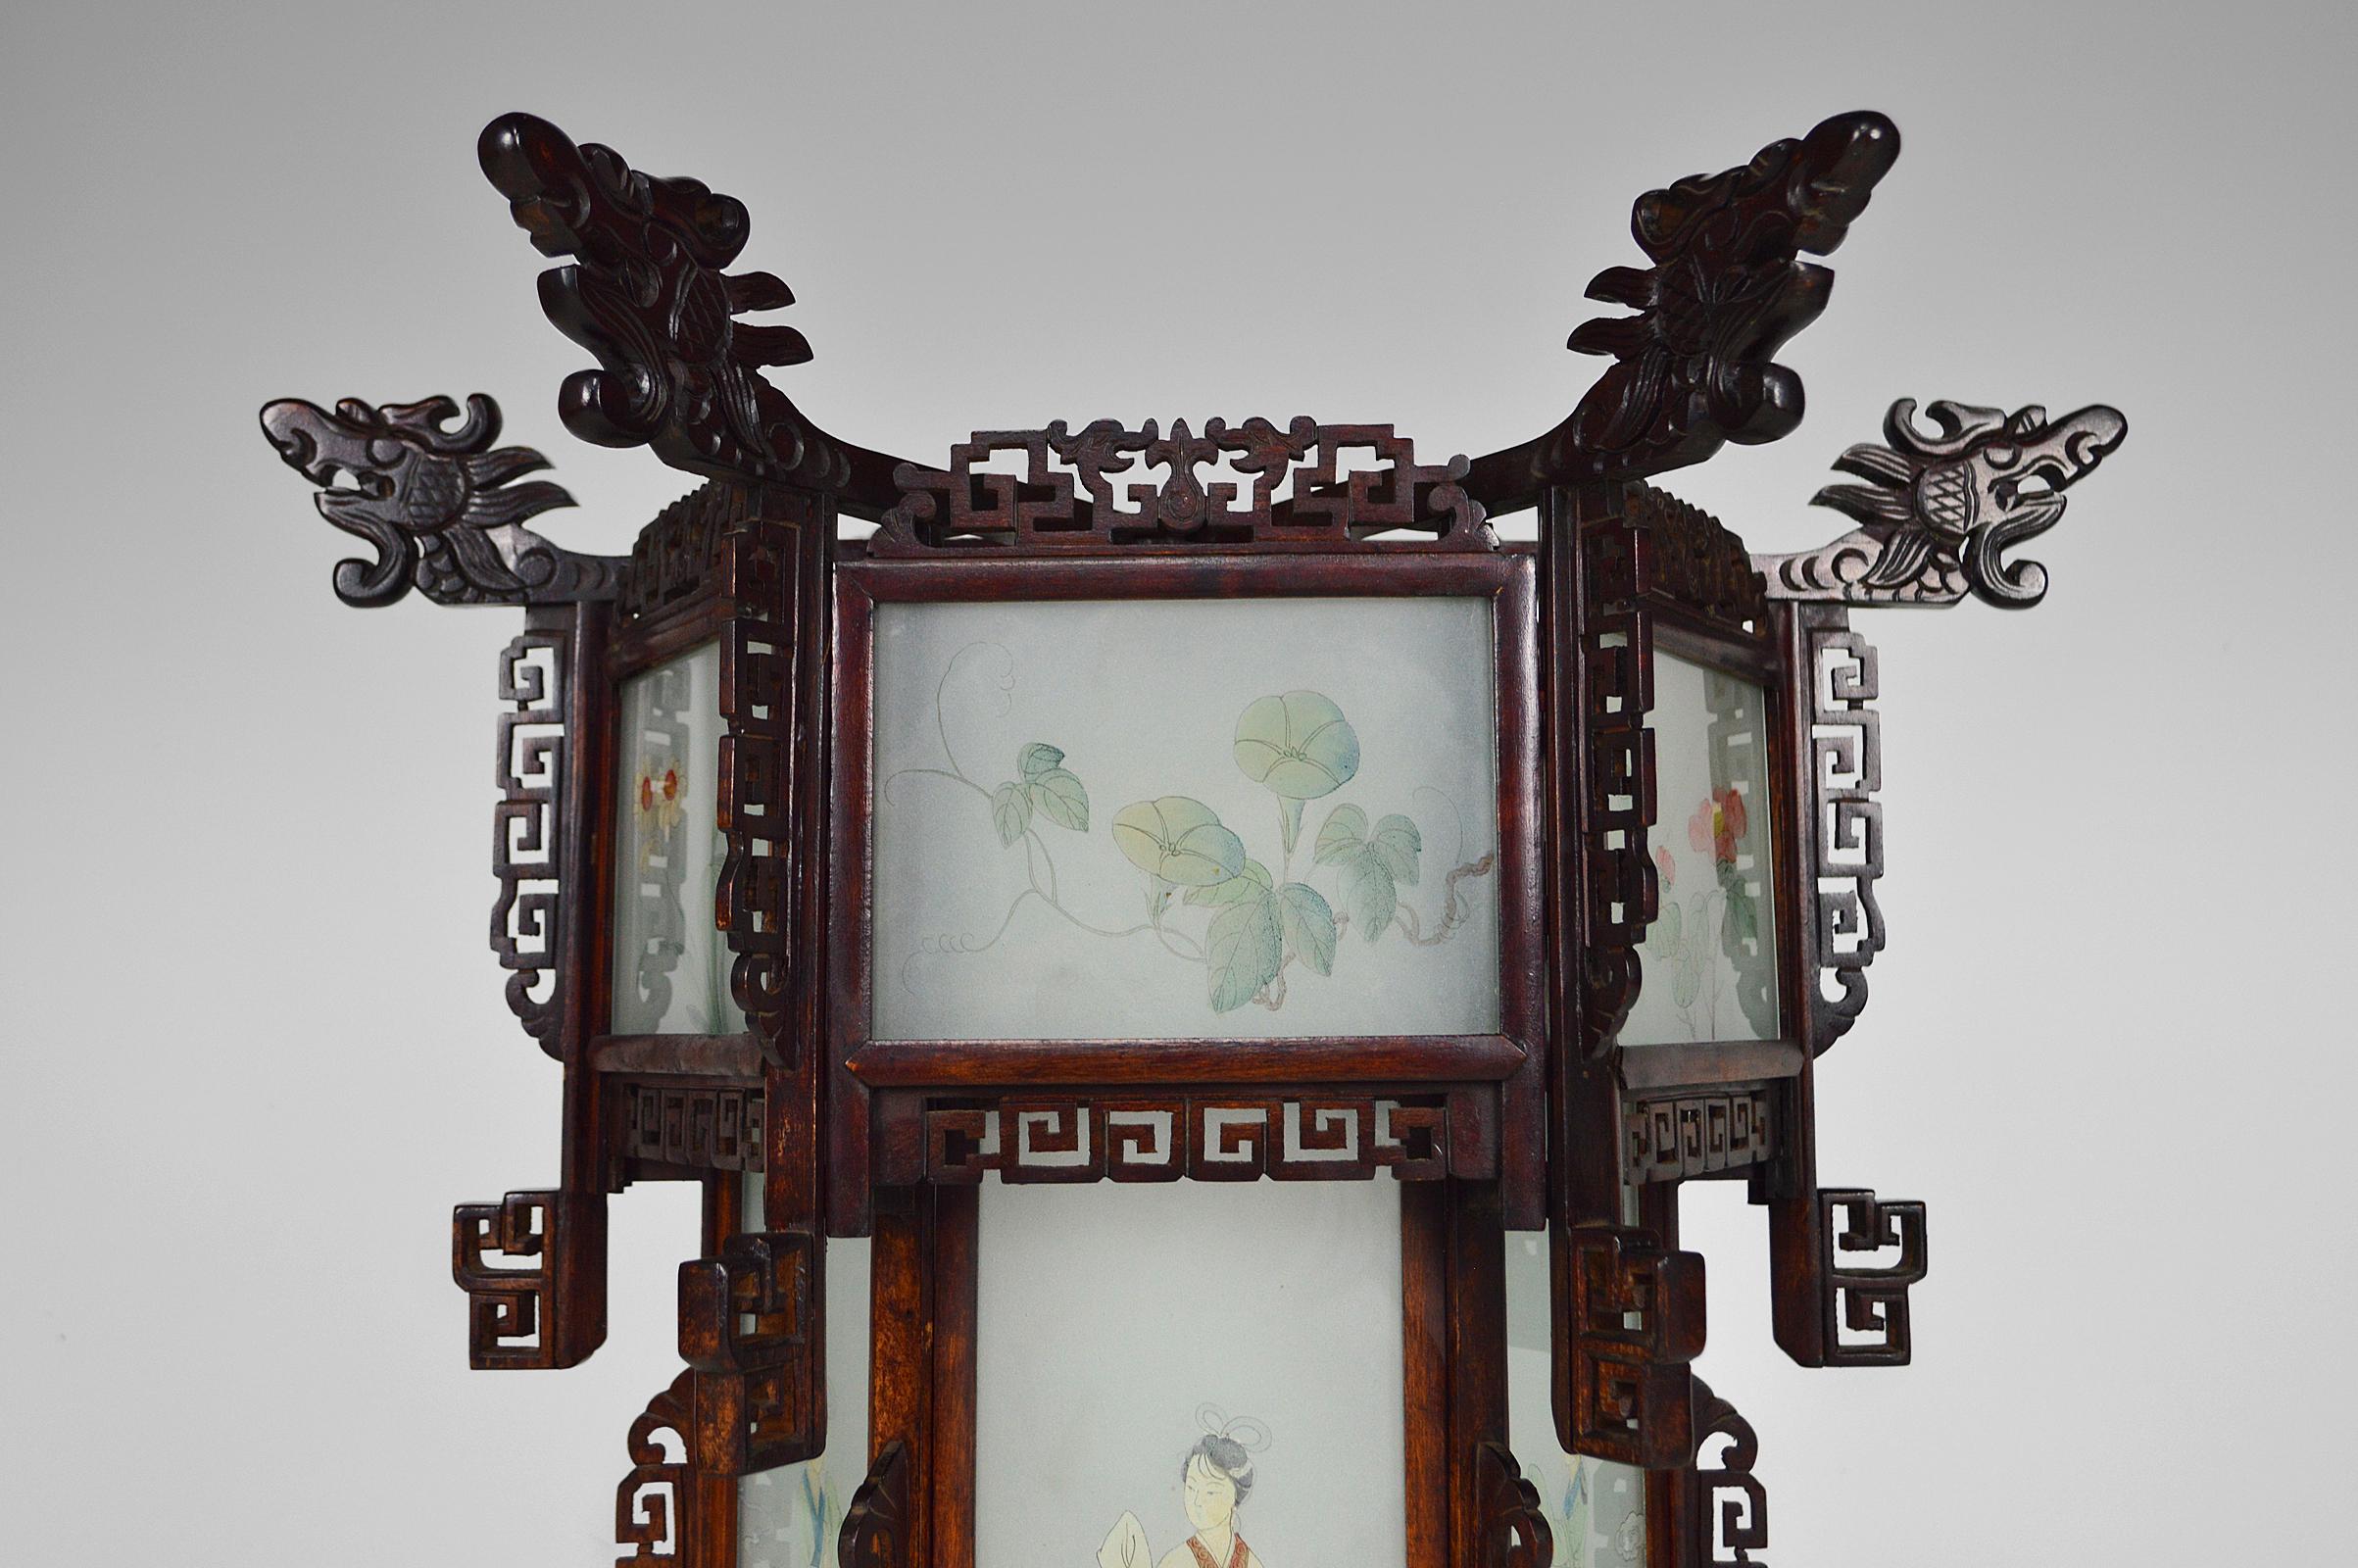 Large Wooden Chinese Lantern with Dragons and Painted Glass, circa 1900 For Sale 3